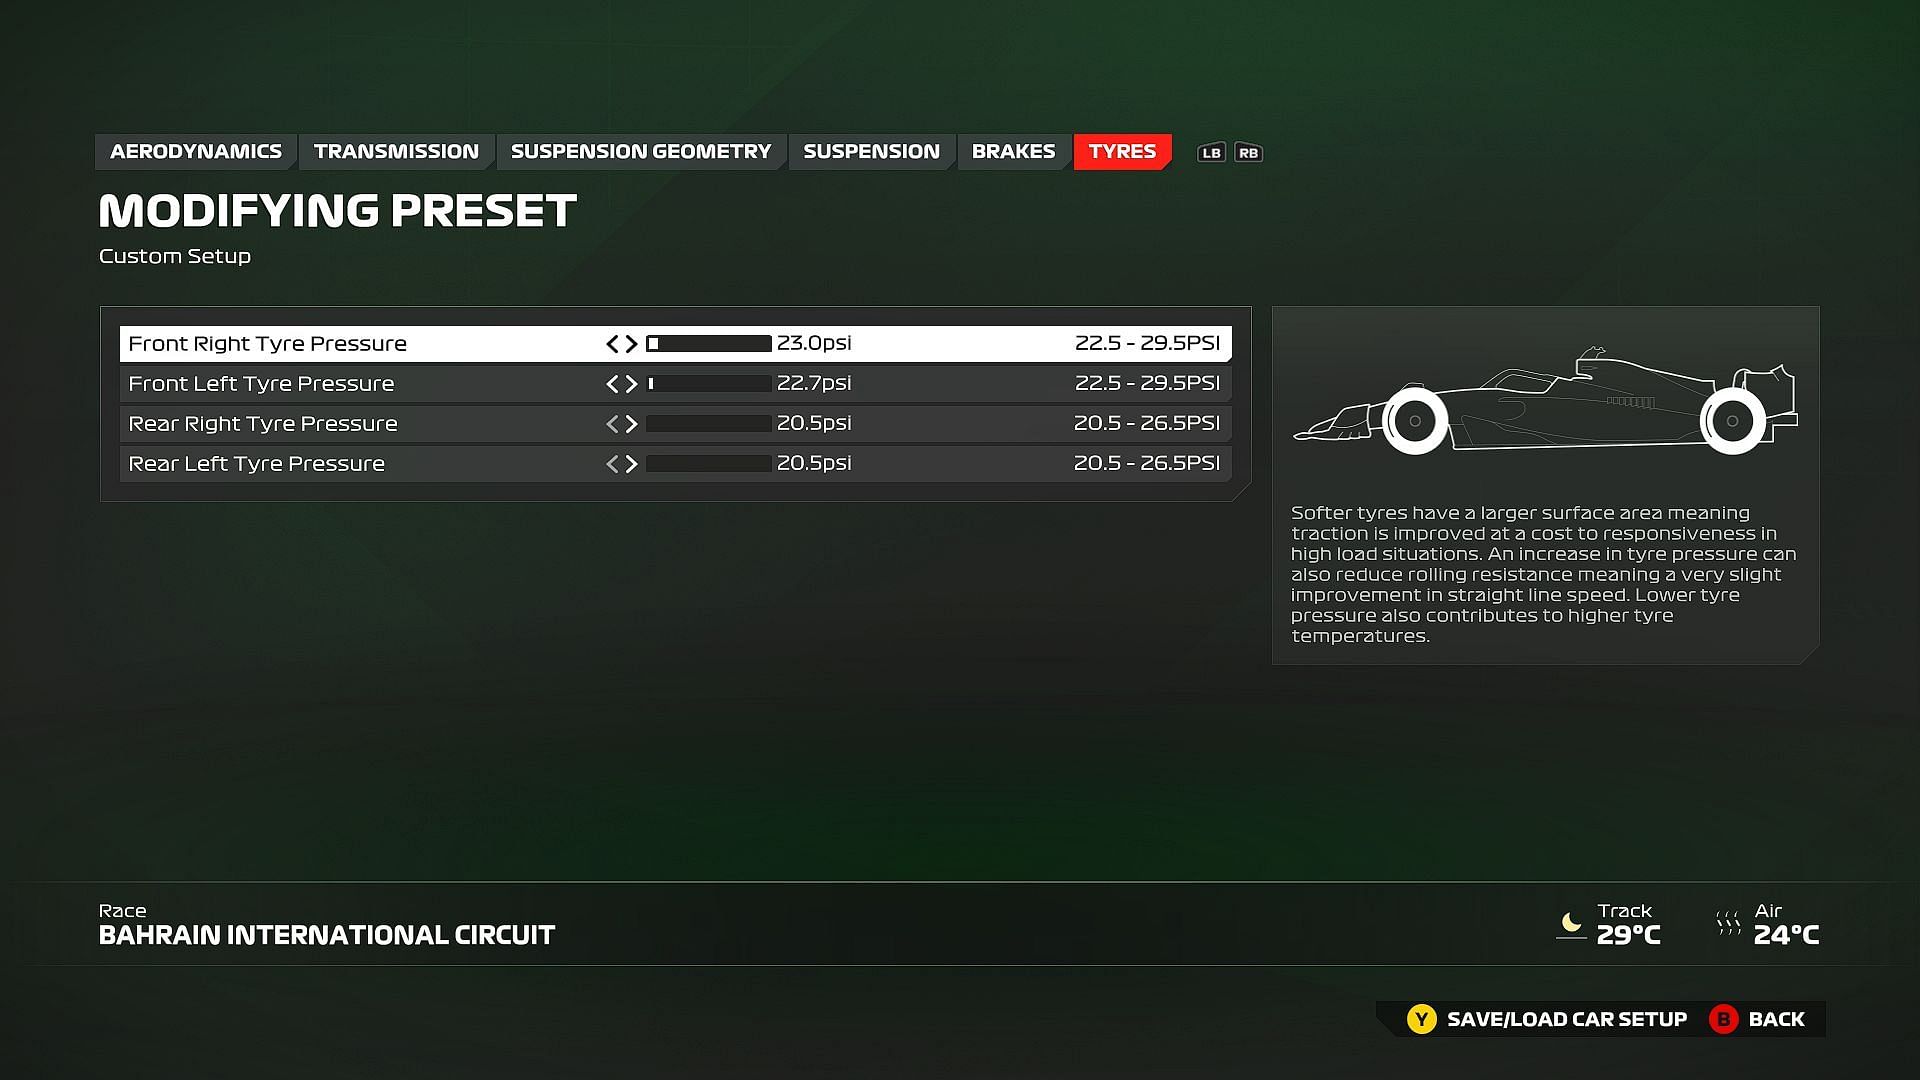 Recommended tyre setup for Bahrain circuit (Image via Codemasters)